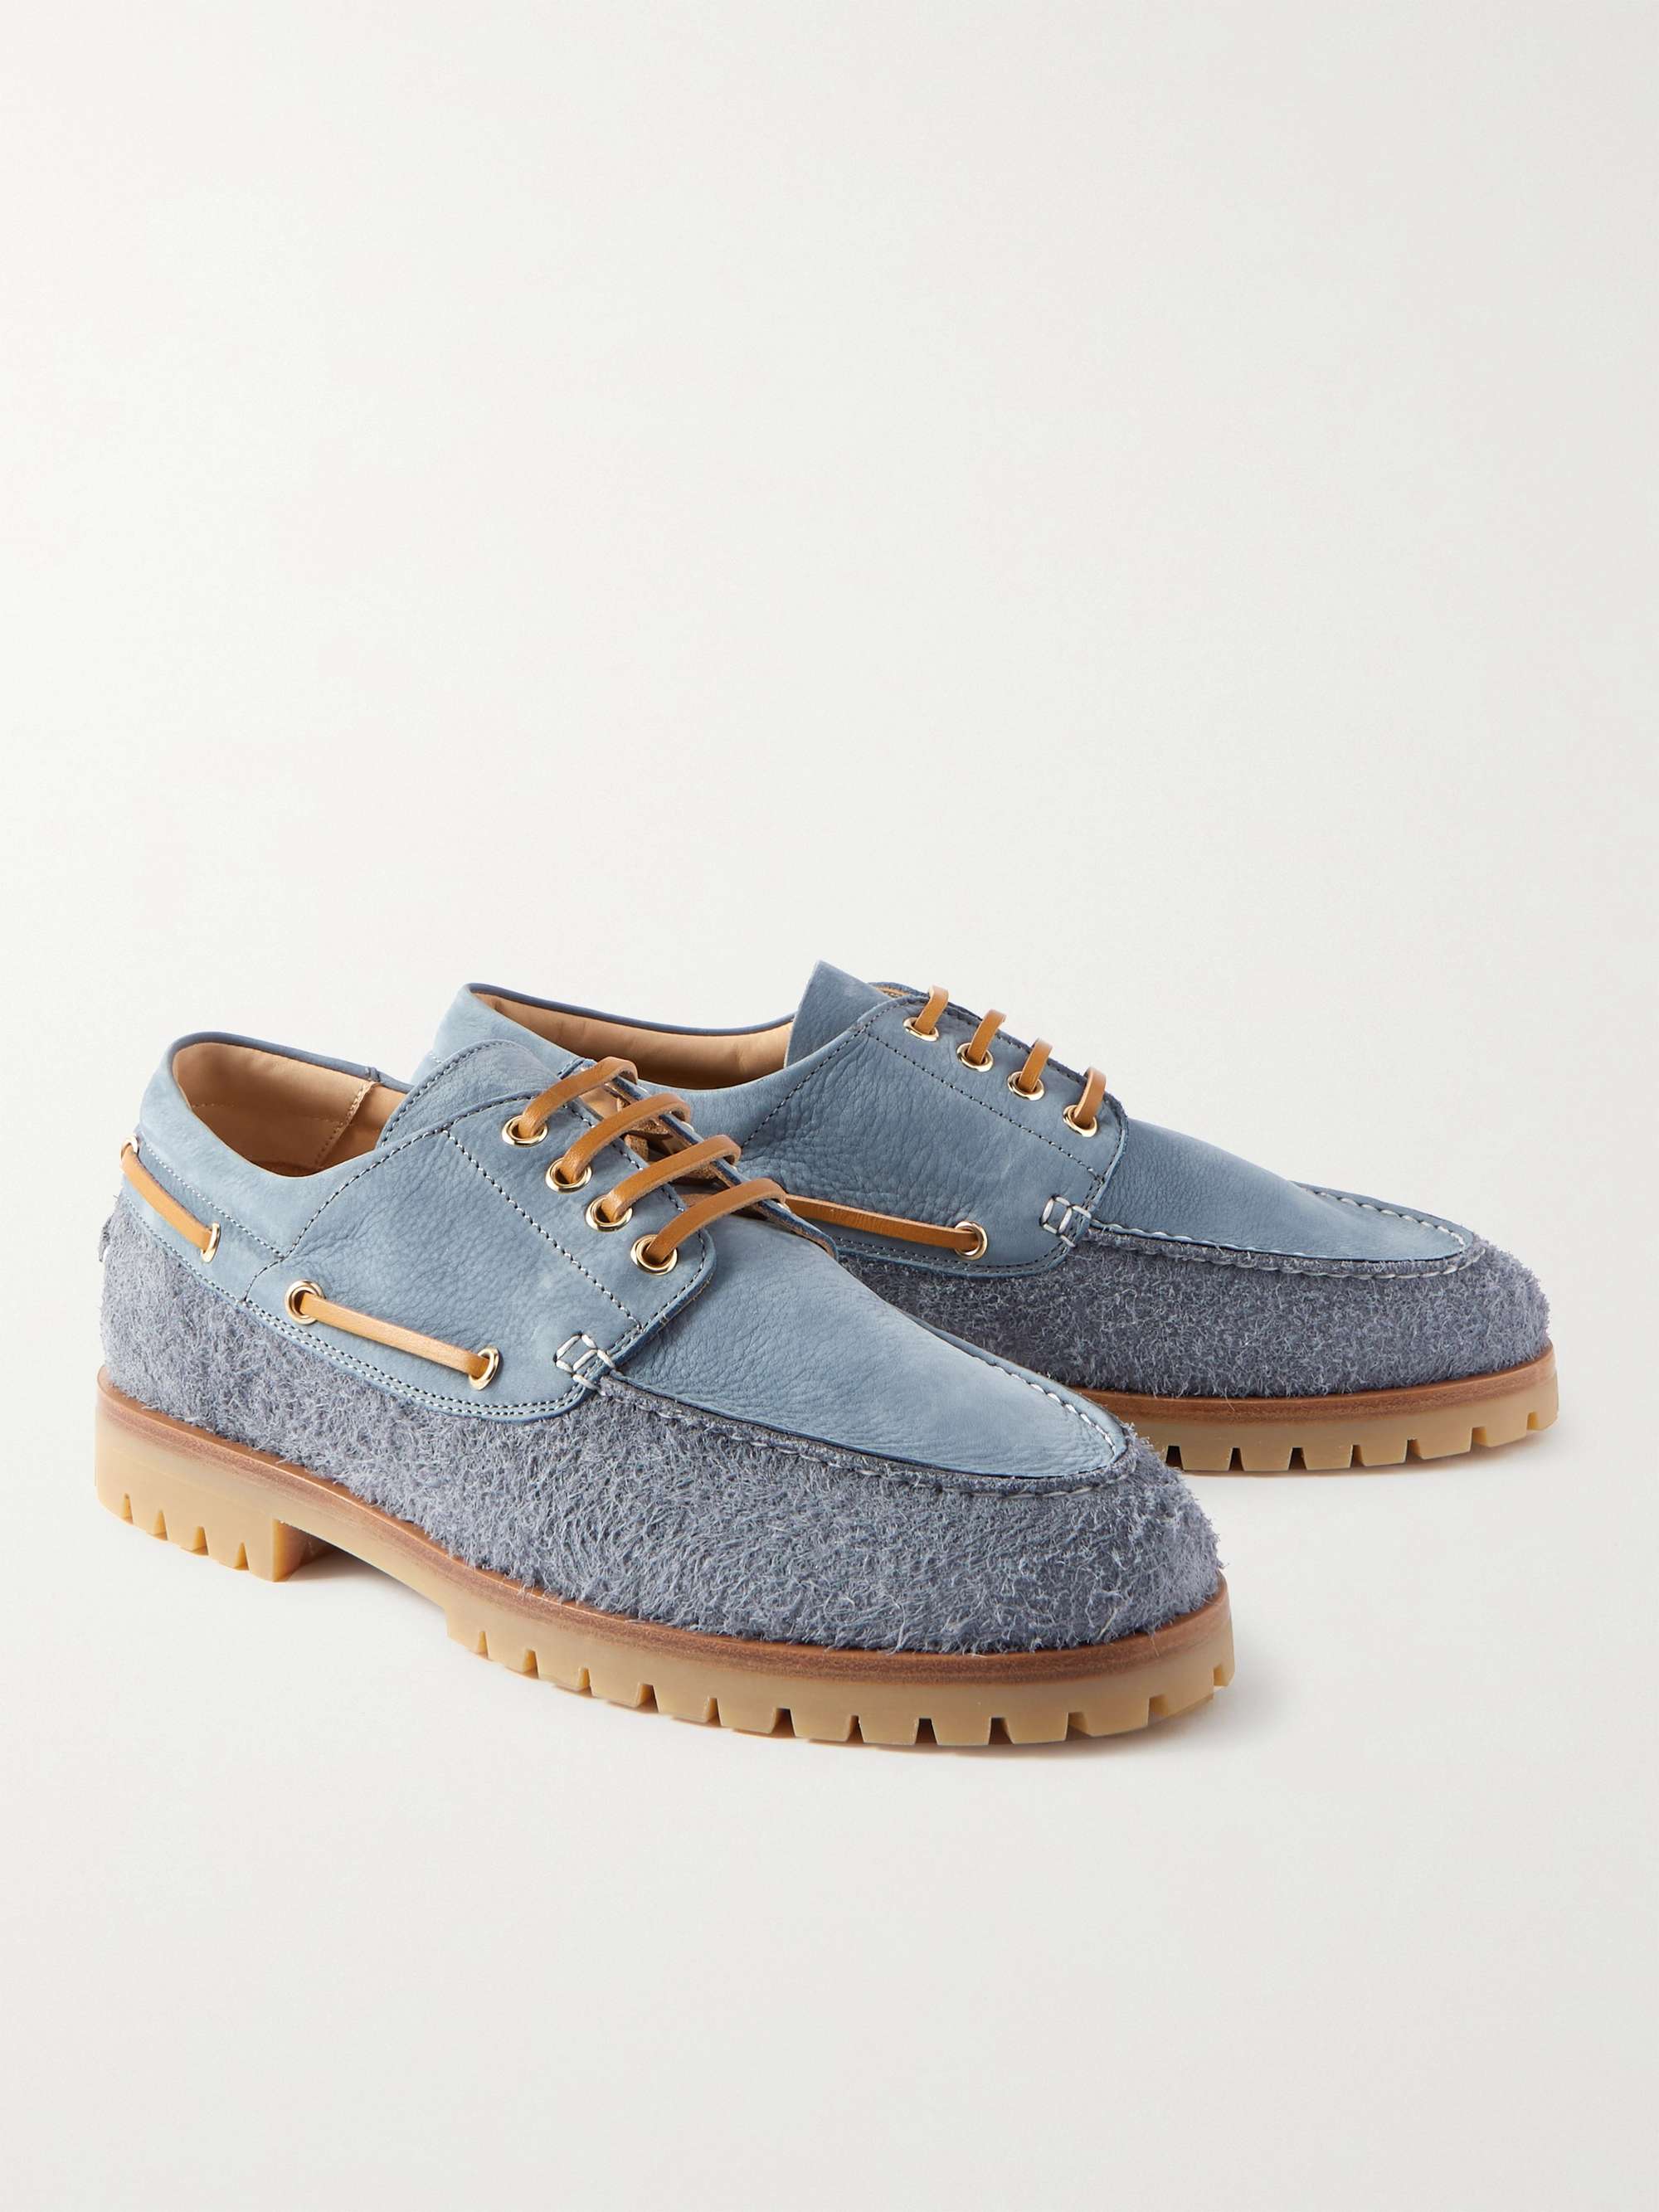 PAUL SMITH Jago Nubuck and Suede Boat Shoes